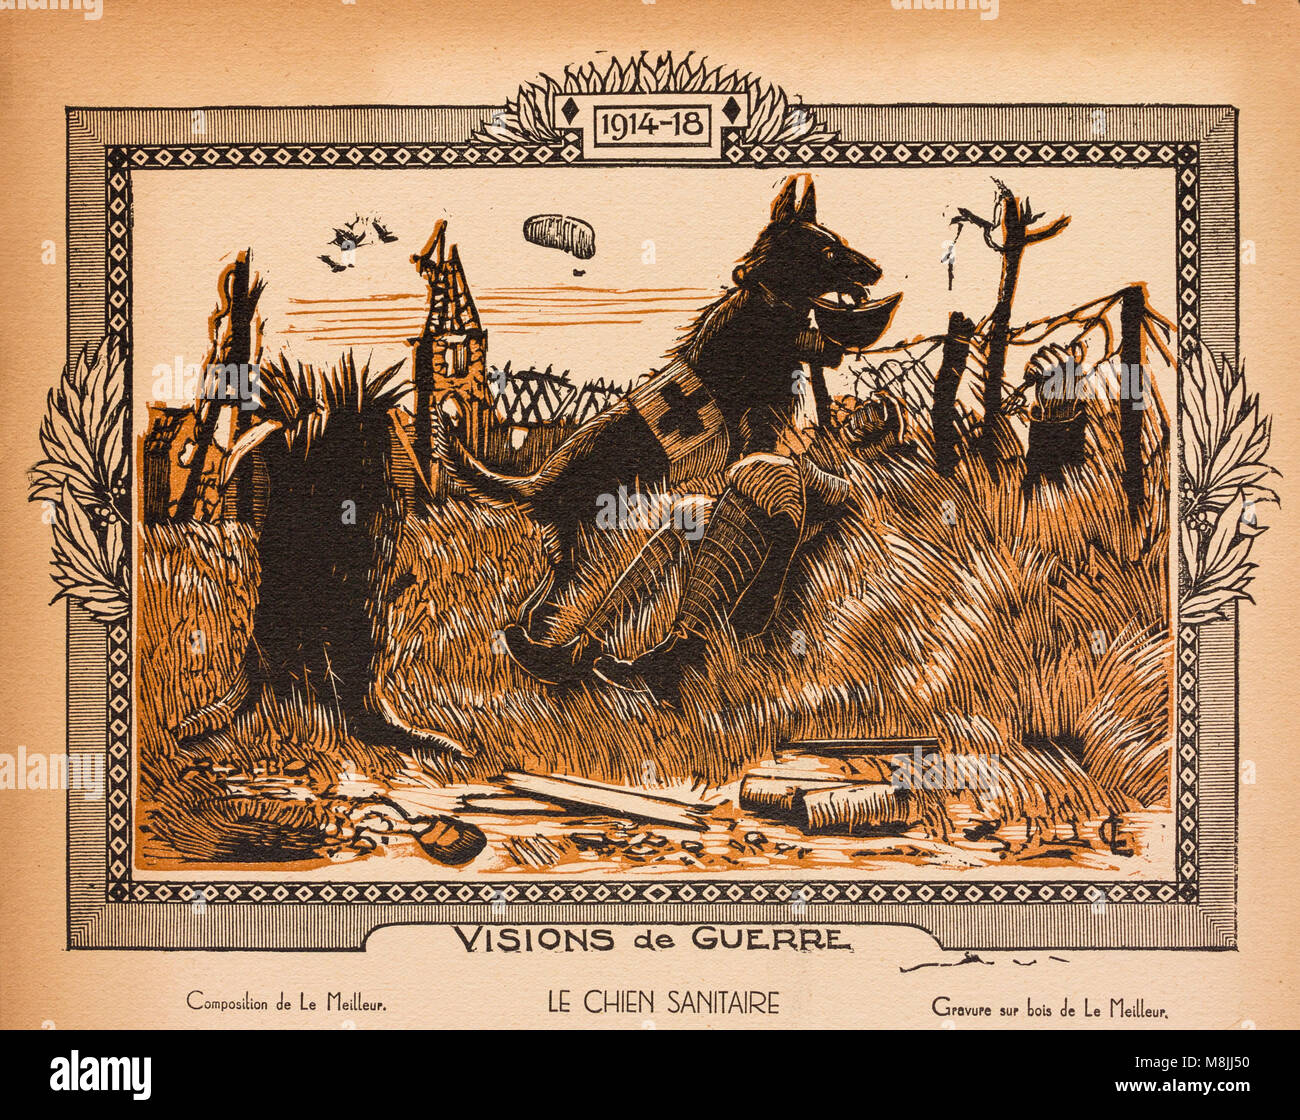 Wood engraving of WW1 depicting 'First Aid Dog', originally published in 1920 in French book 'La guerre racontée par nos généraux' (The War Recounted by Our Generals) by FAYOLLE (Maréchal) et DUBAIL (Général). Stock Photo